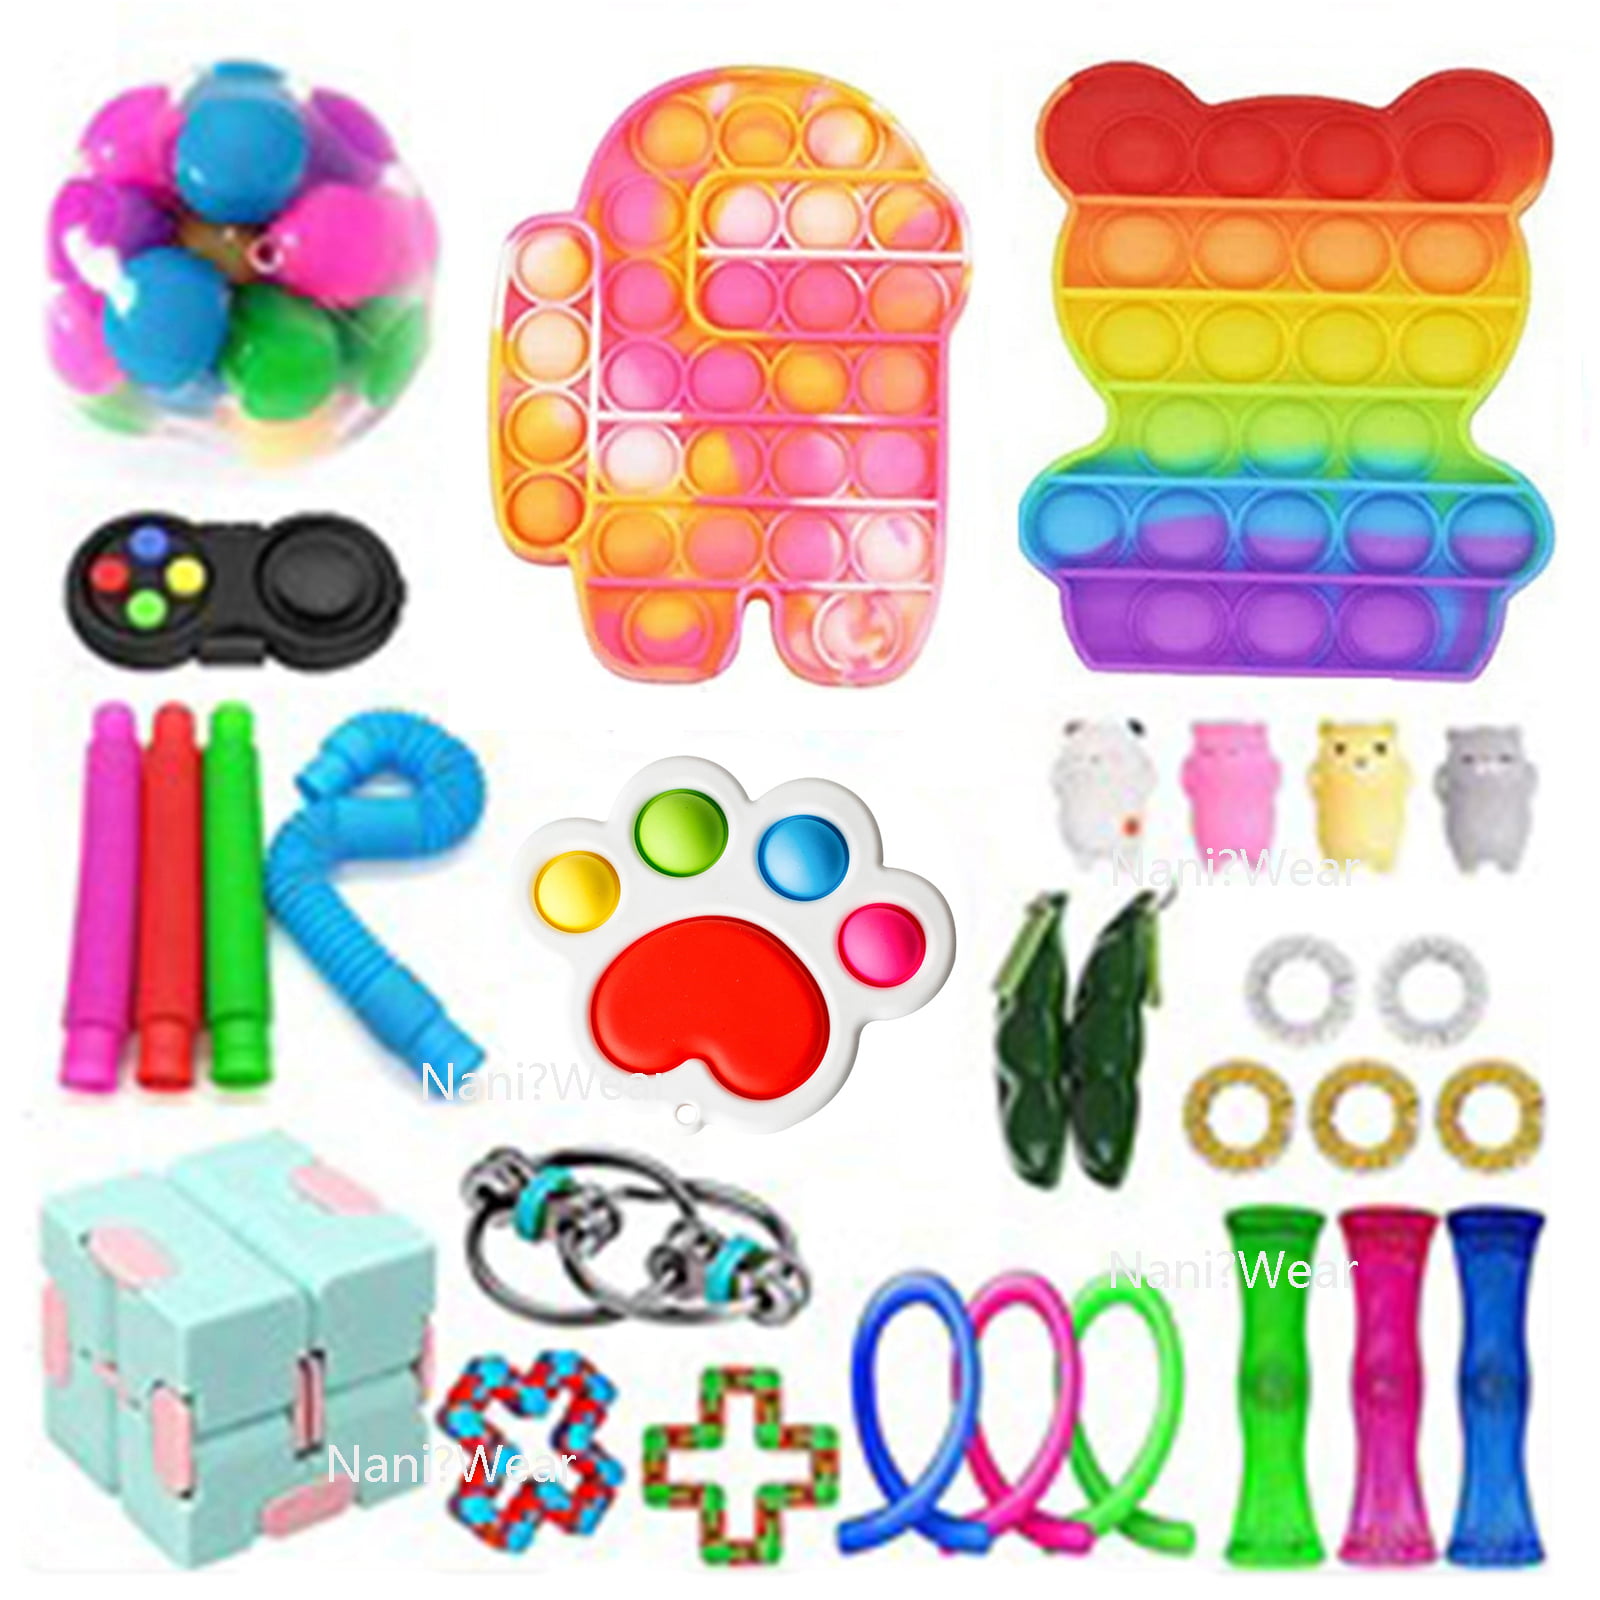 Bubble Popper Fidget Toy Stress Anxiety Relief Toys for ADHD Autism Special Needs UK-STOCK A Fidget Toys Set for Kids & Adults Pop It Fidget Sensory Toy